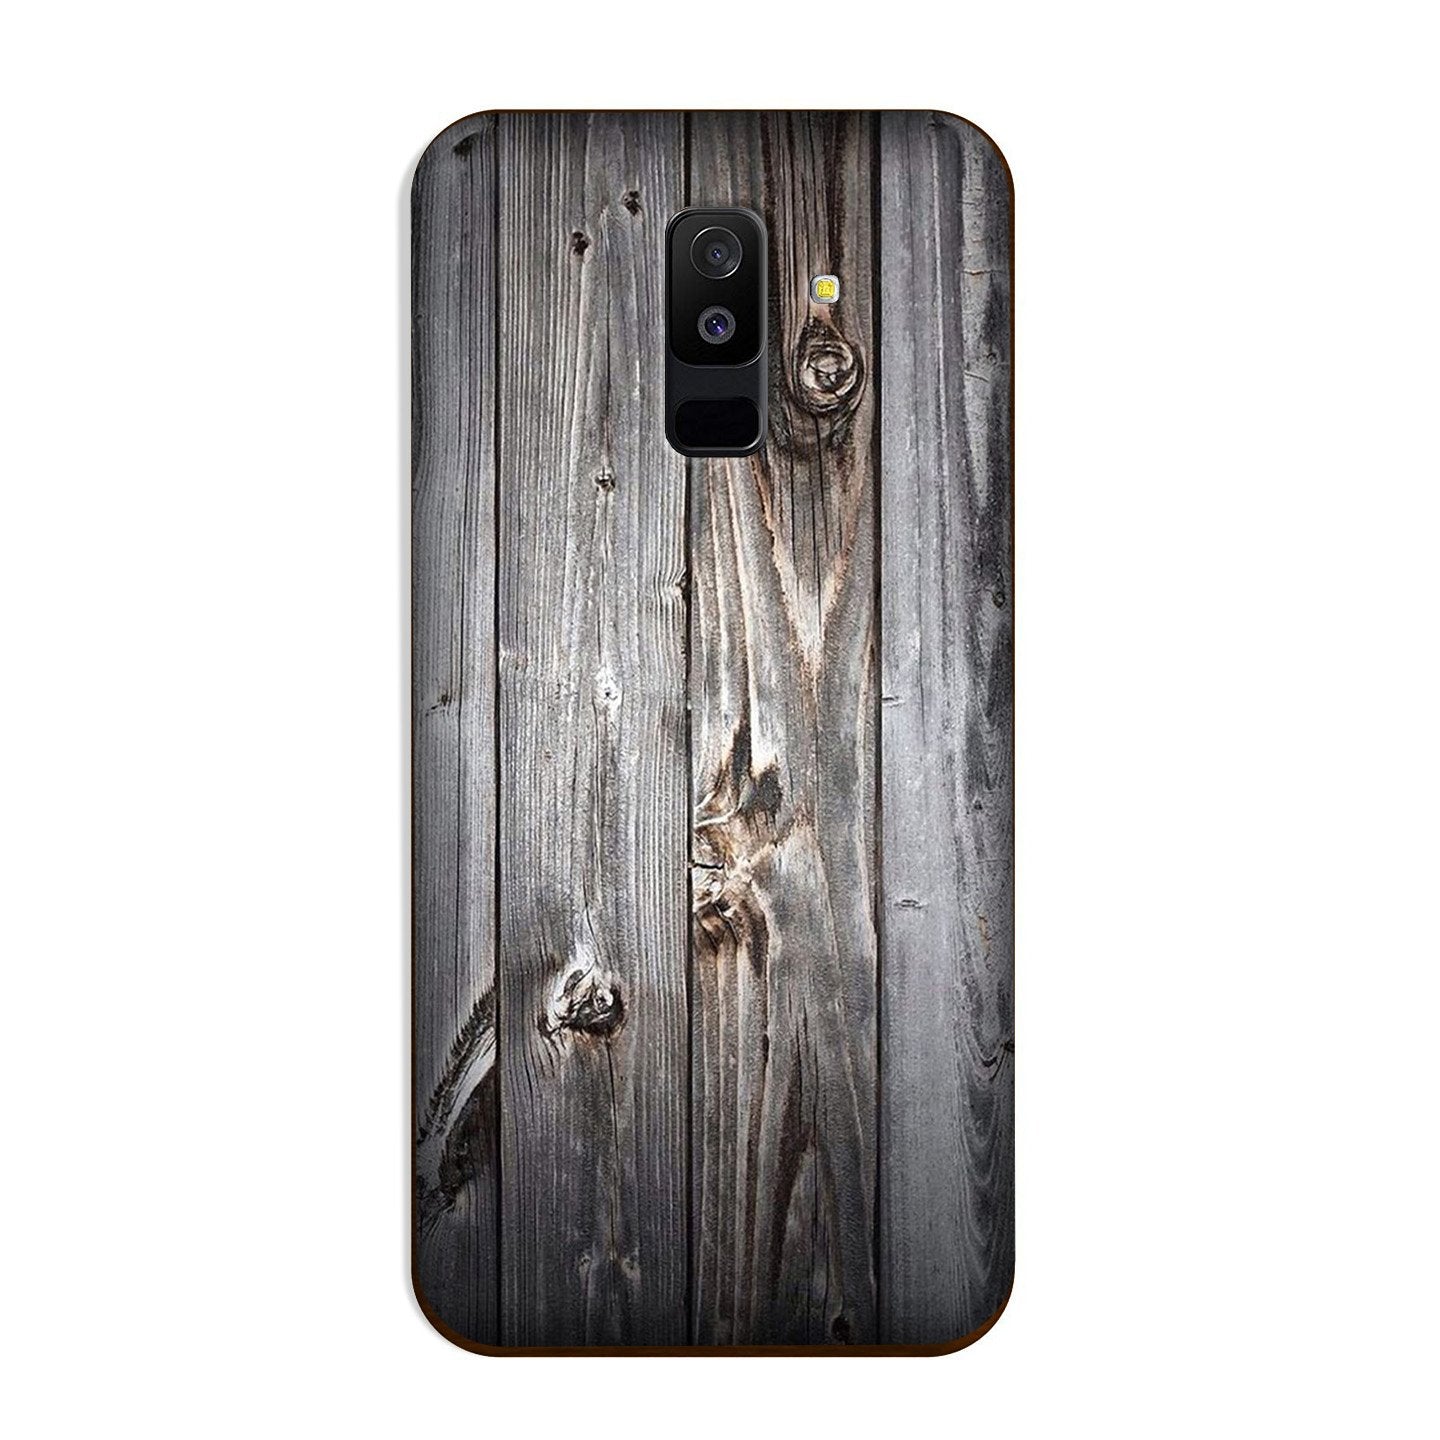 Wooden Look Case for Galaxy A6 Plus  (Design - 114)